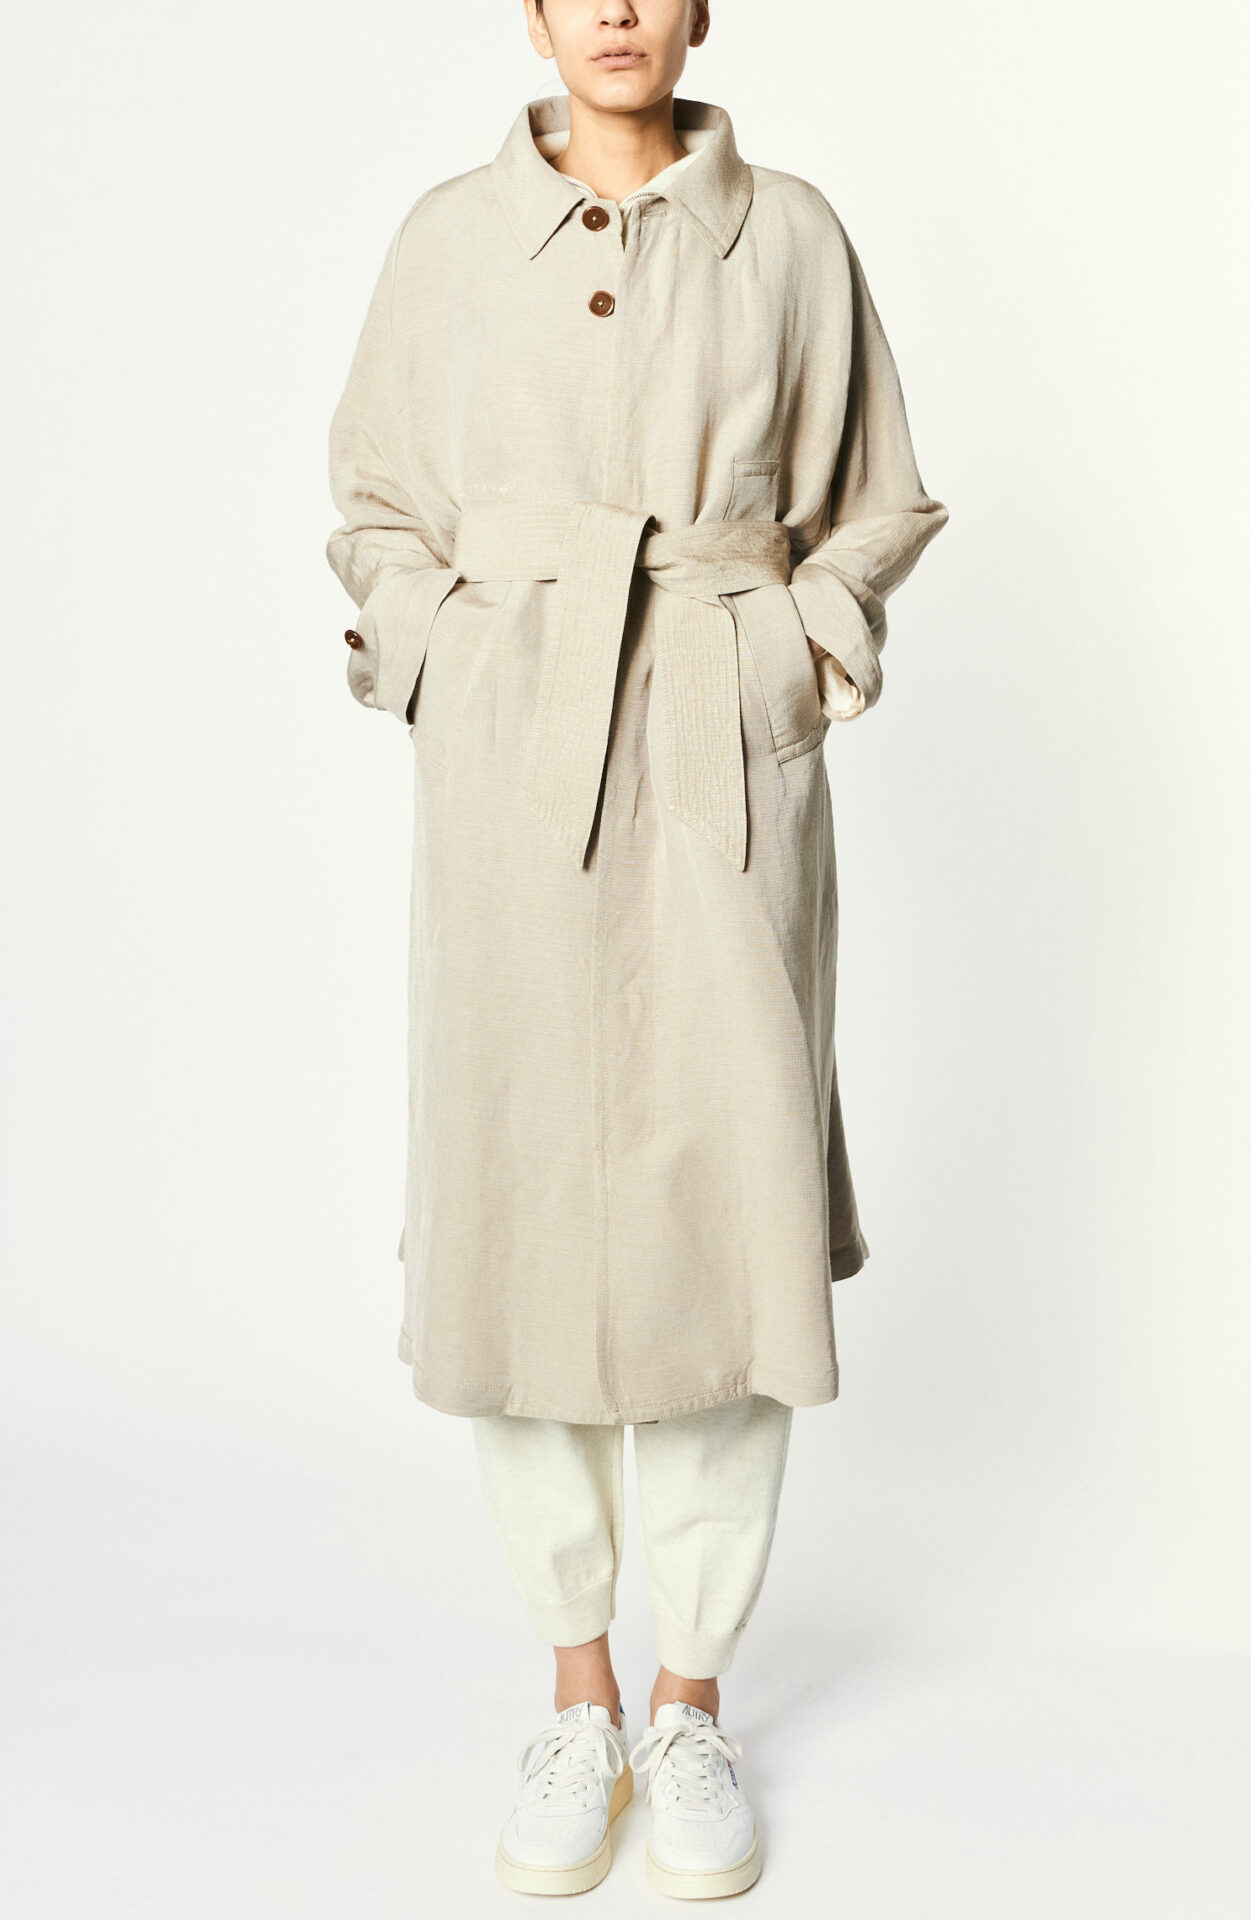 Sand colored trench coat "Leone